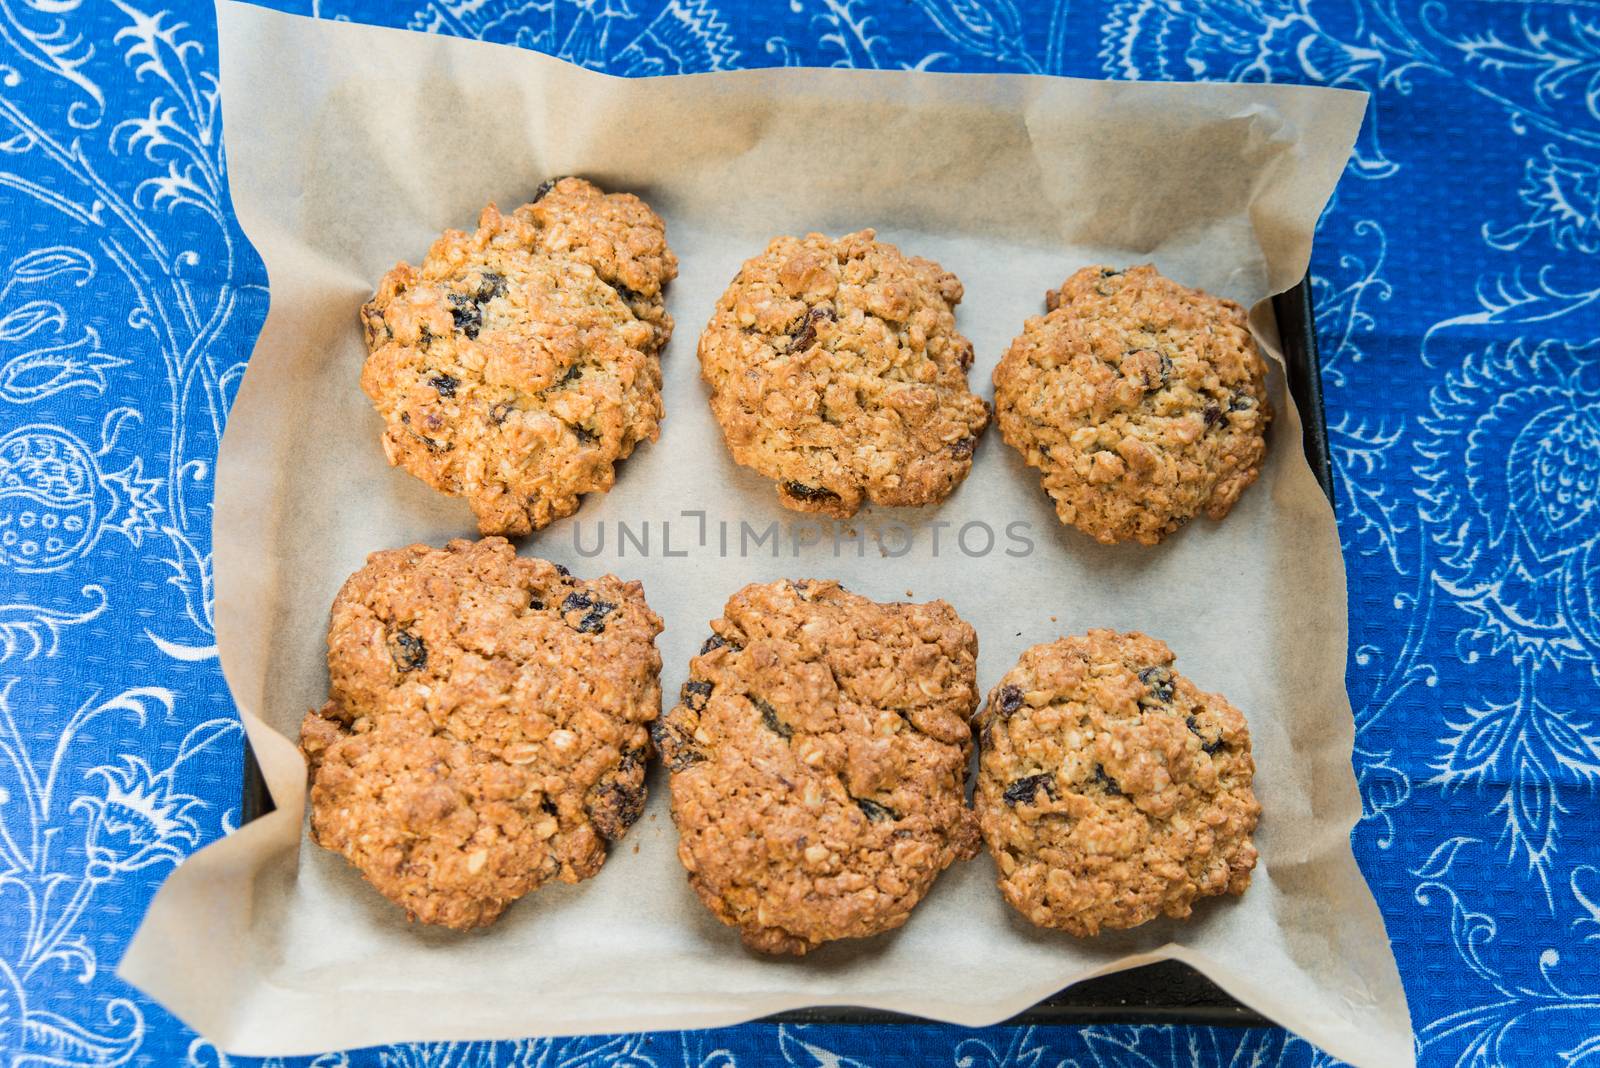 Oatmeal cookies in the baking dish by Linaga